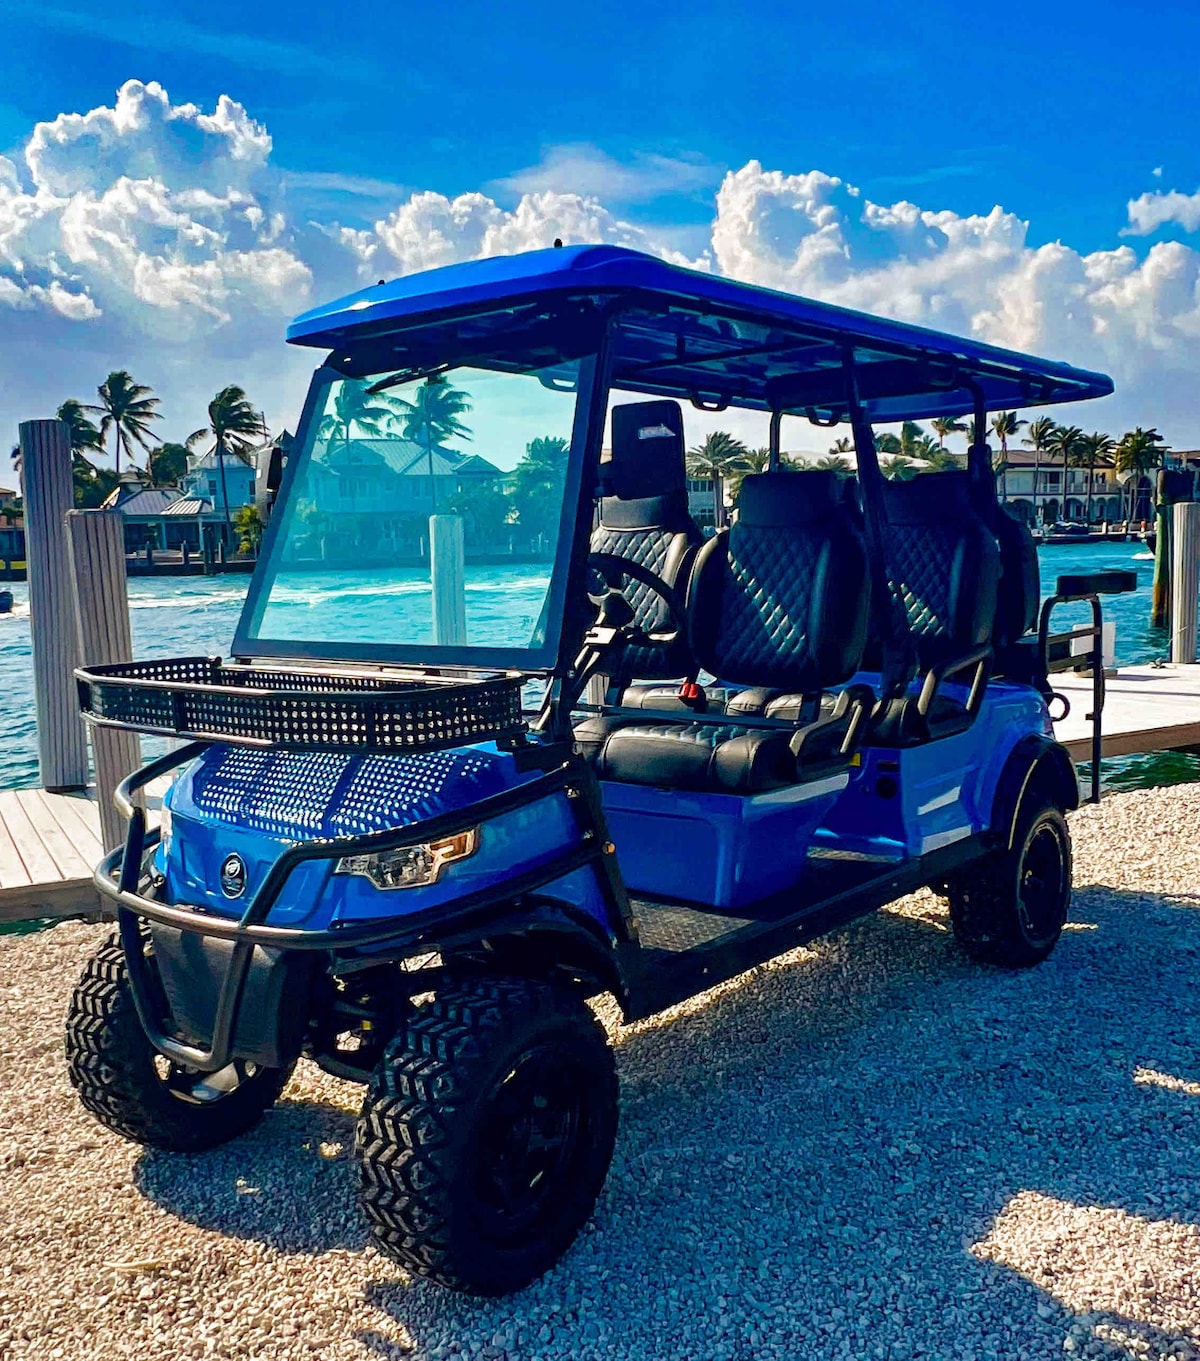 EAST of A1A Private Beach Guest house & Golf Cart!